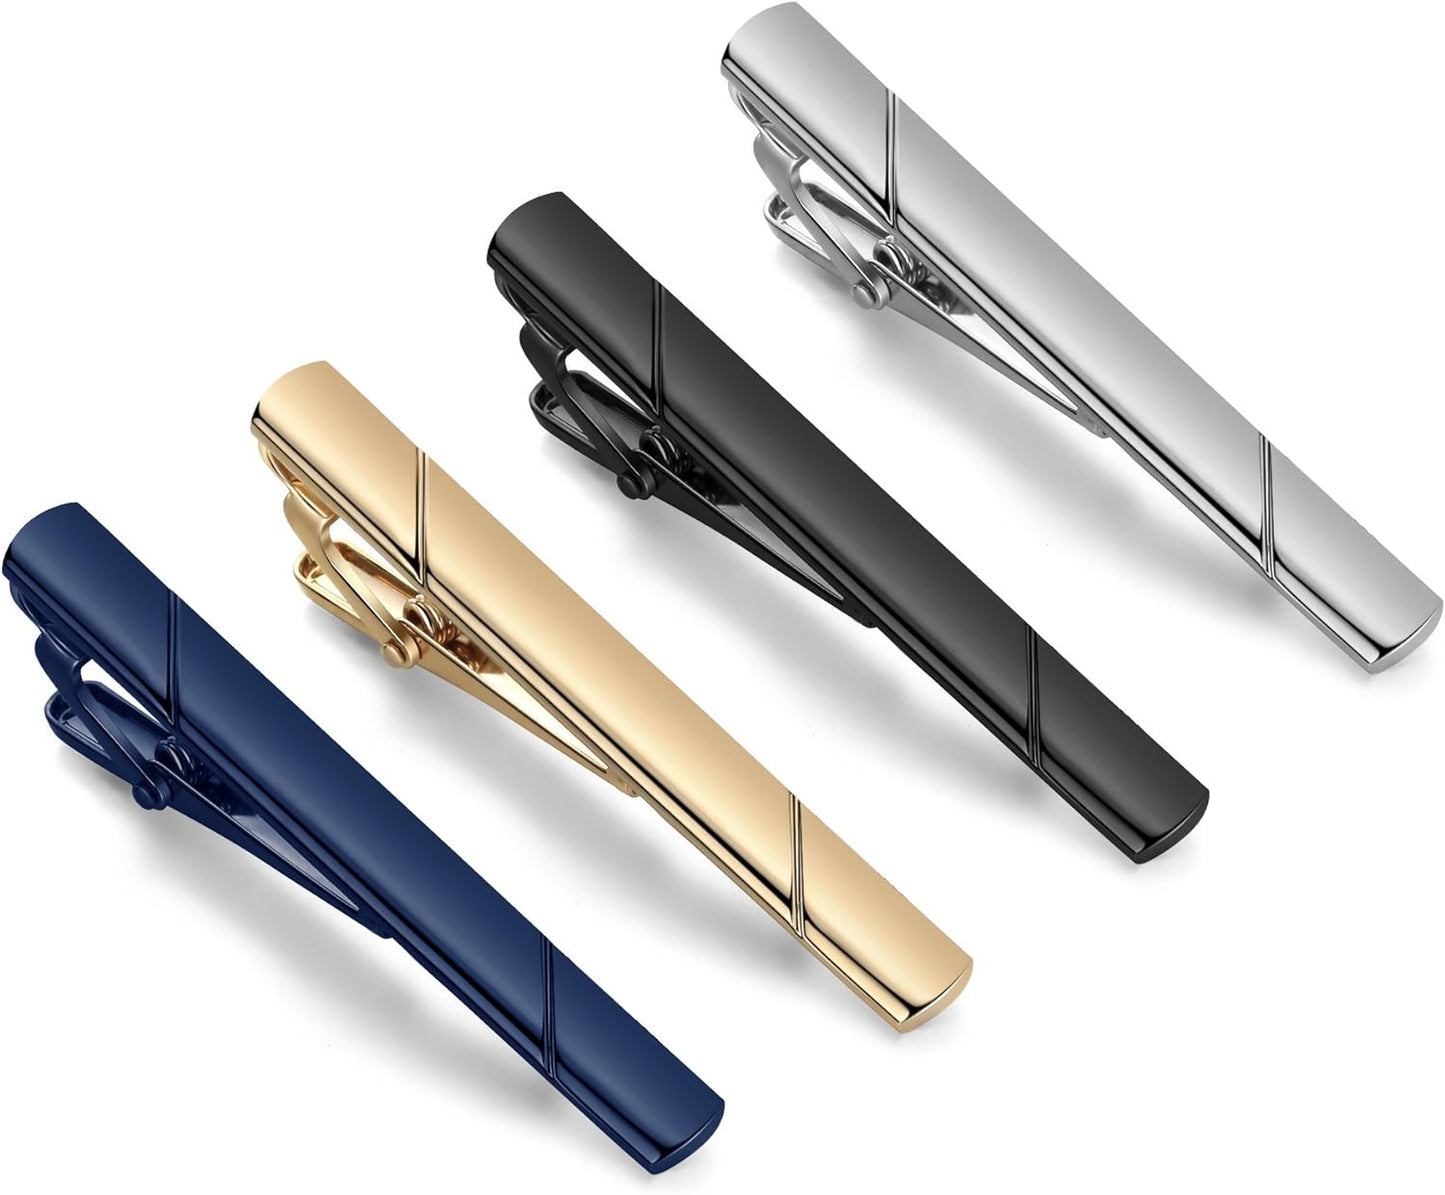 1pc Upgrade Your Business Look With A Stylish Men's Tie Clip Bar - Perfect For Weddings & Business, For Jewelry Gift And Party